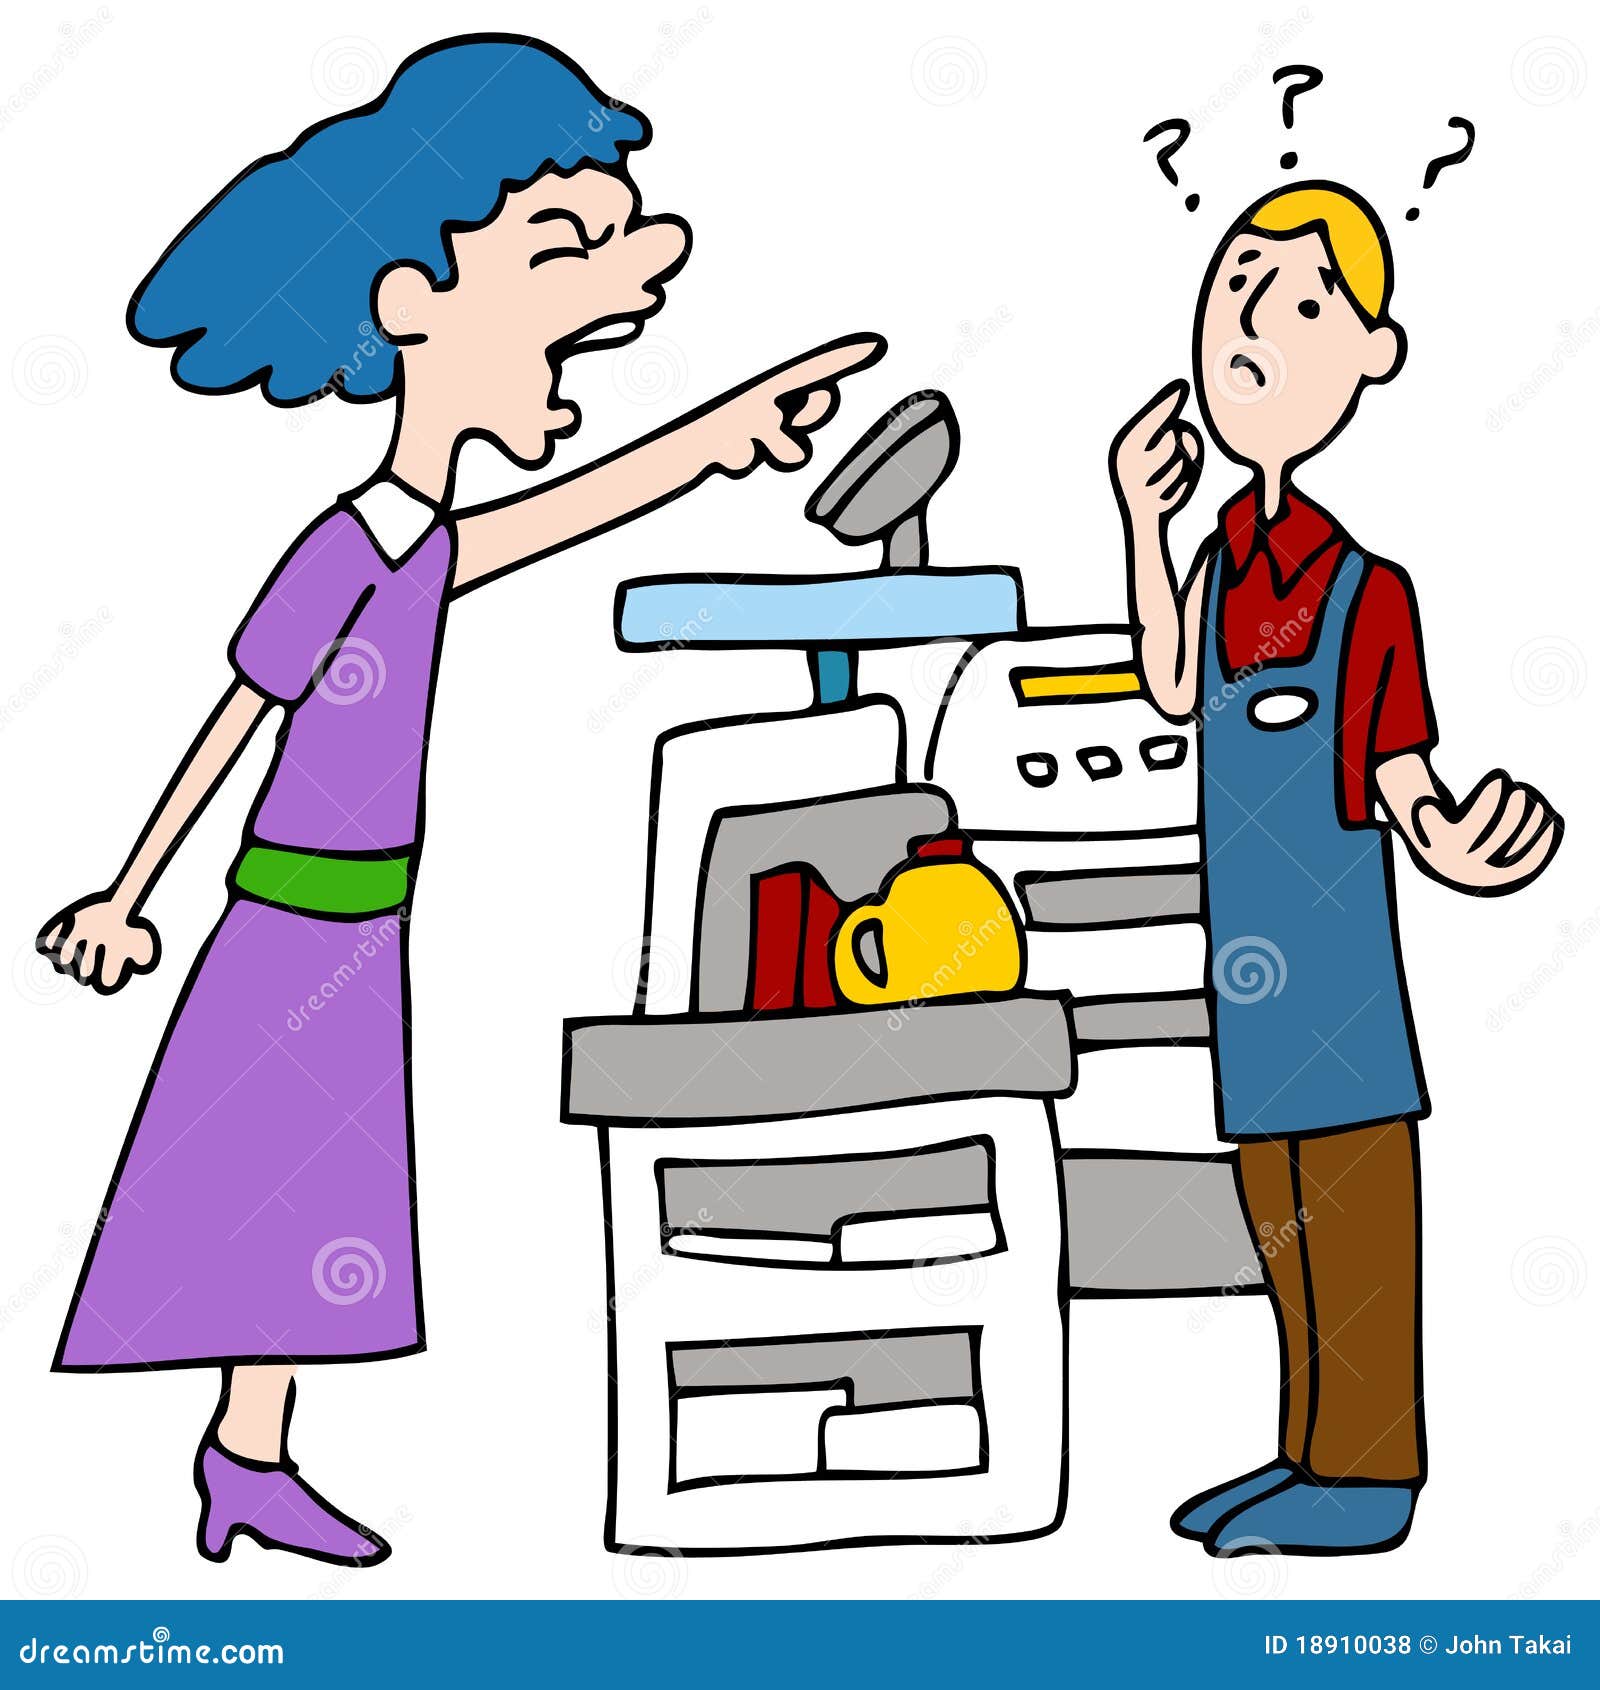 restaurant workers clipart - photo #39